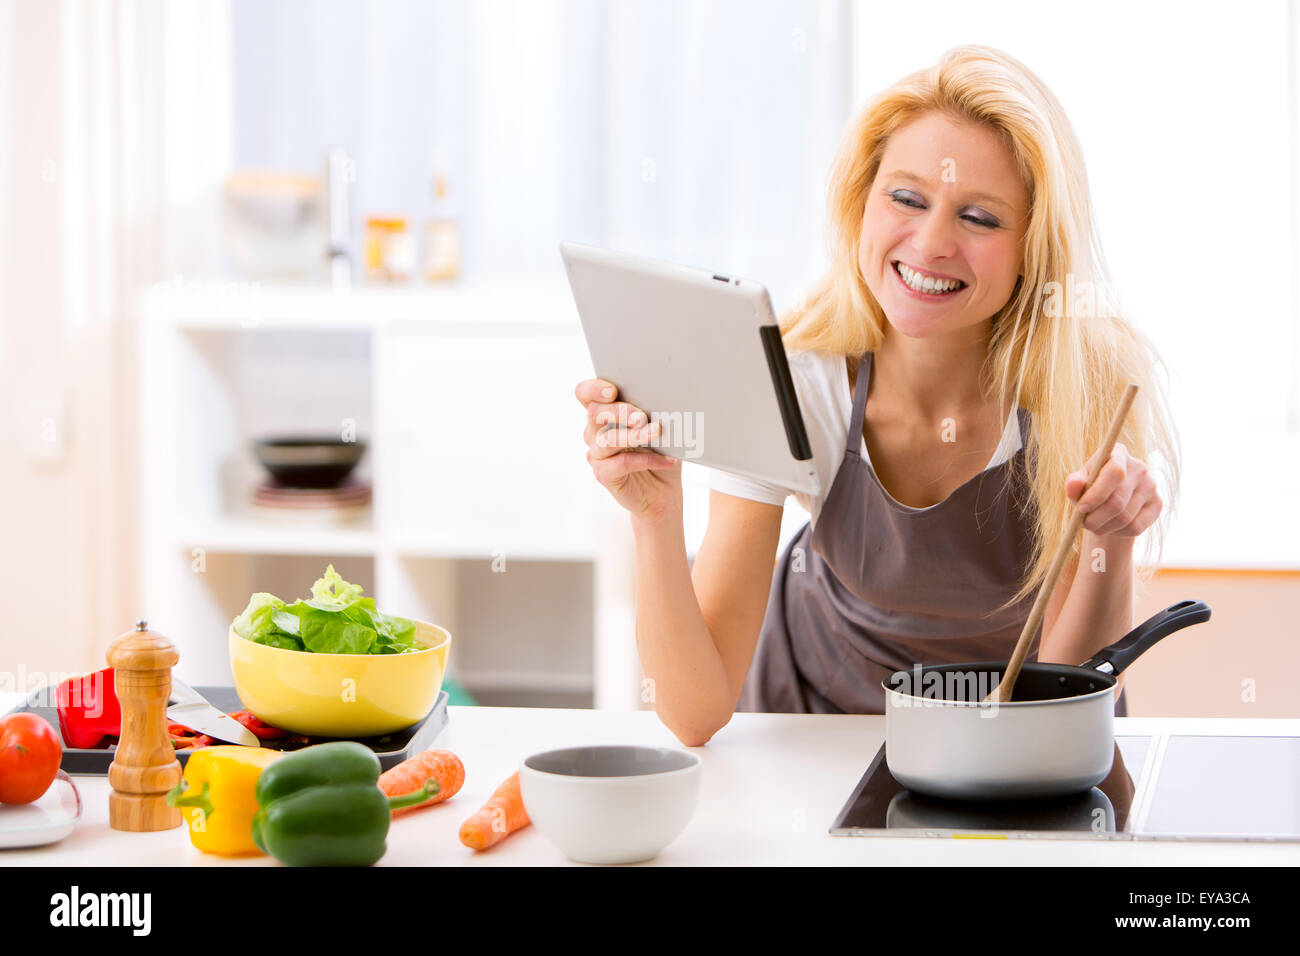 View of a Young attractive woman cooking in a kitchen Stock Photo